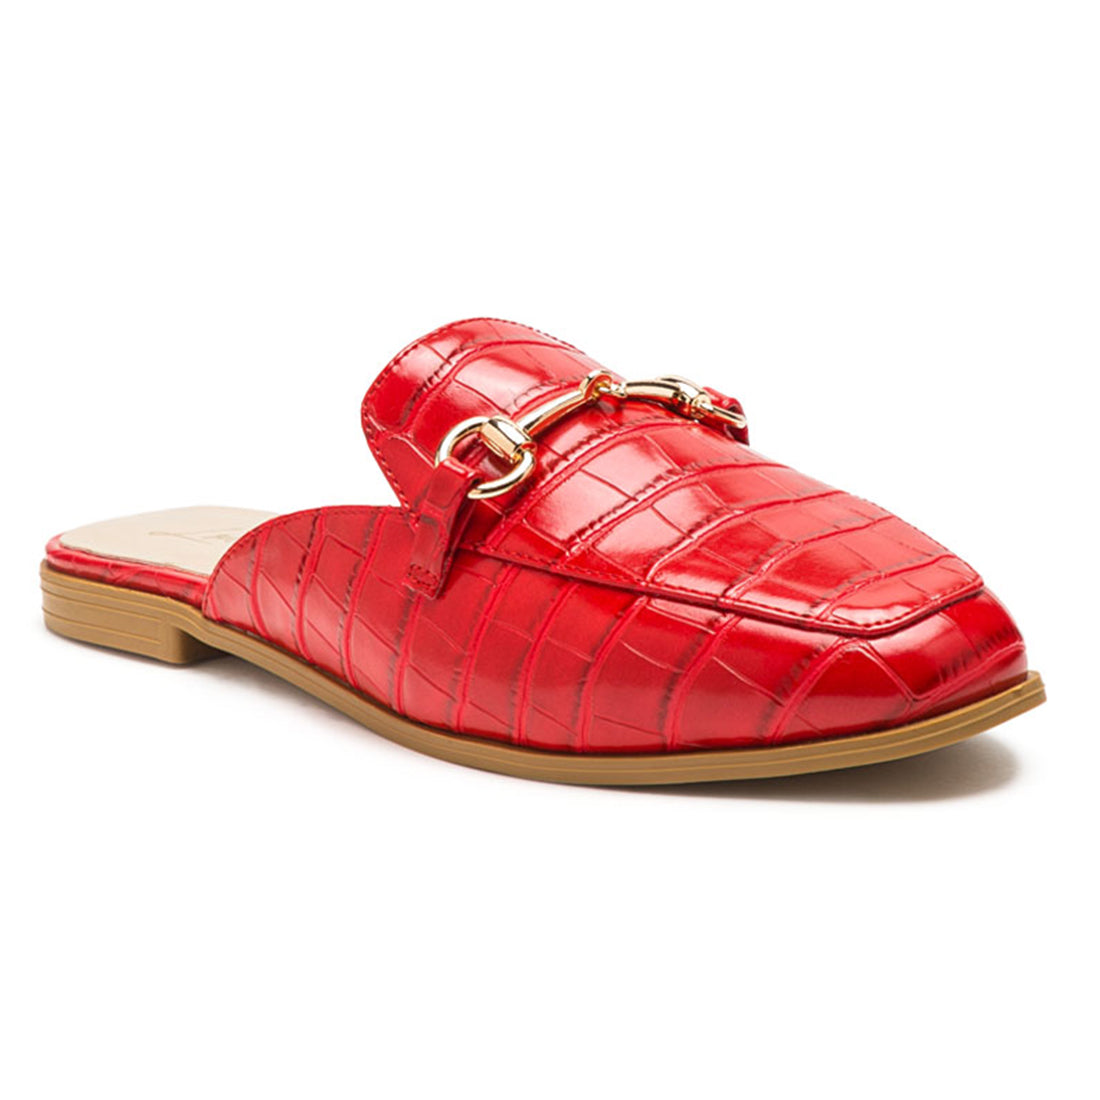 Buckled croc Mules in Red